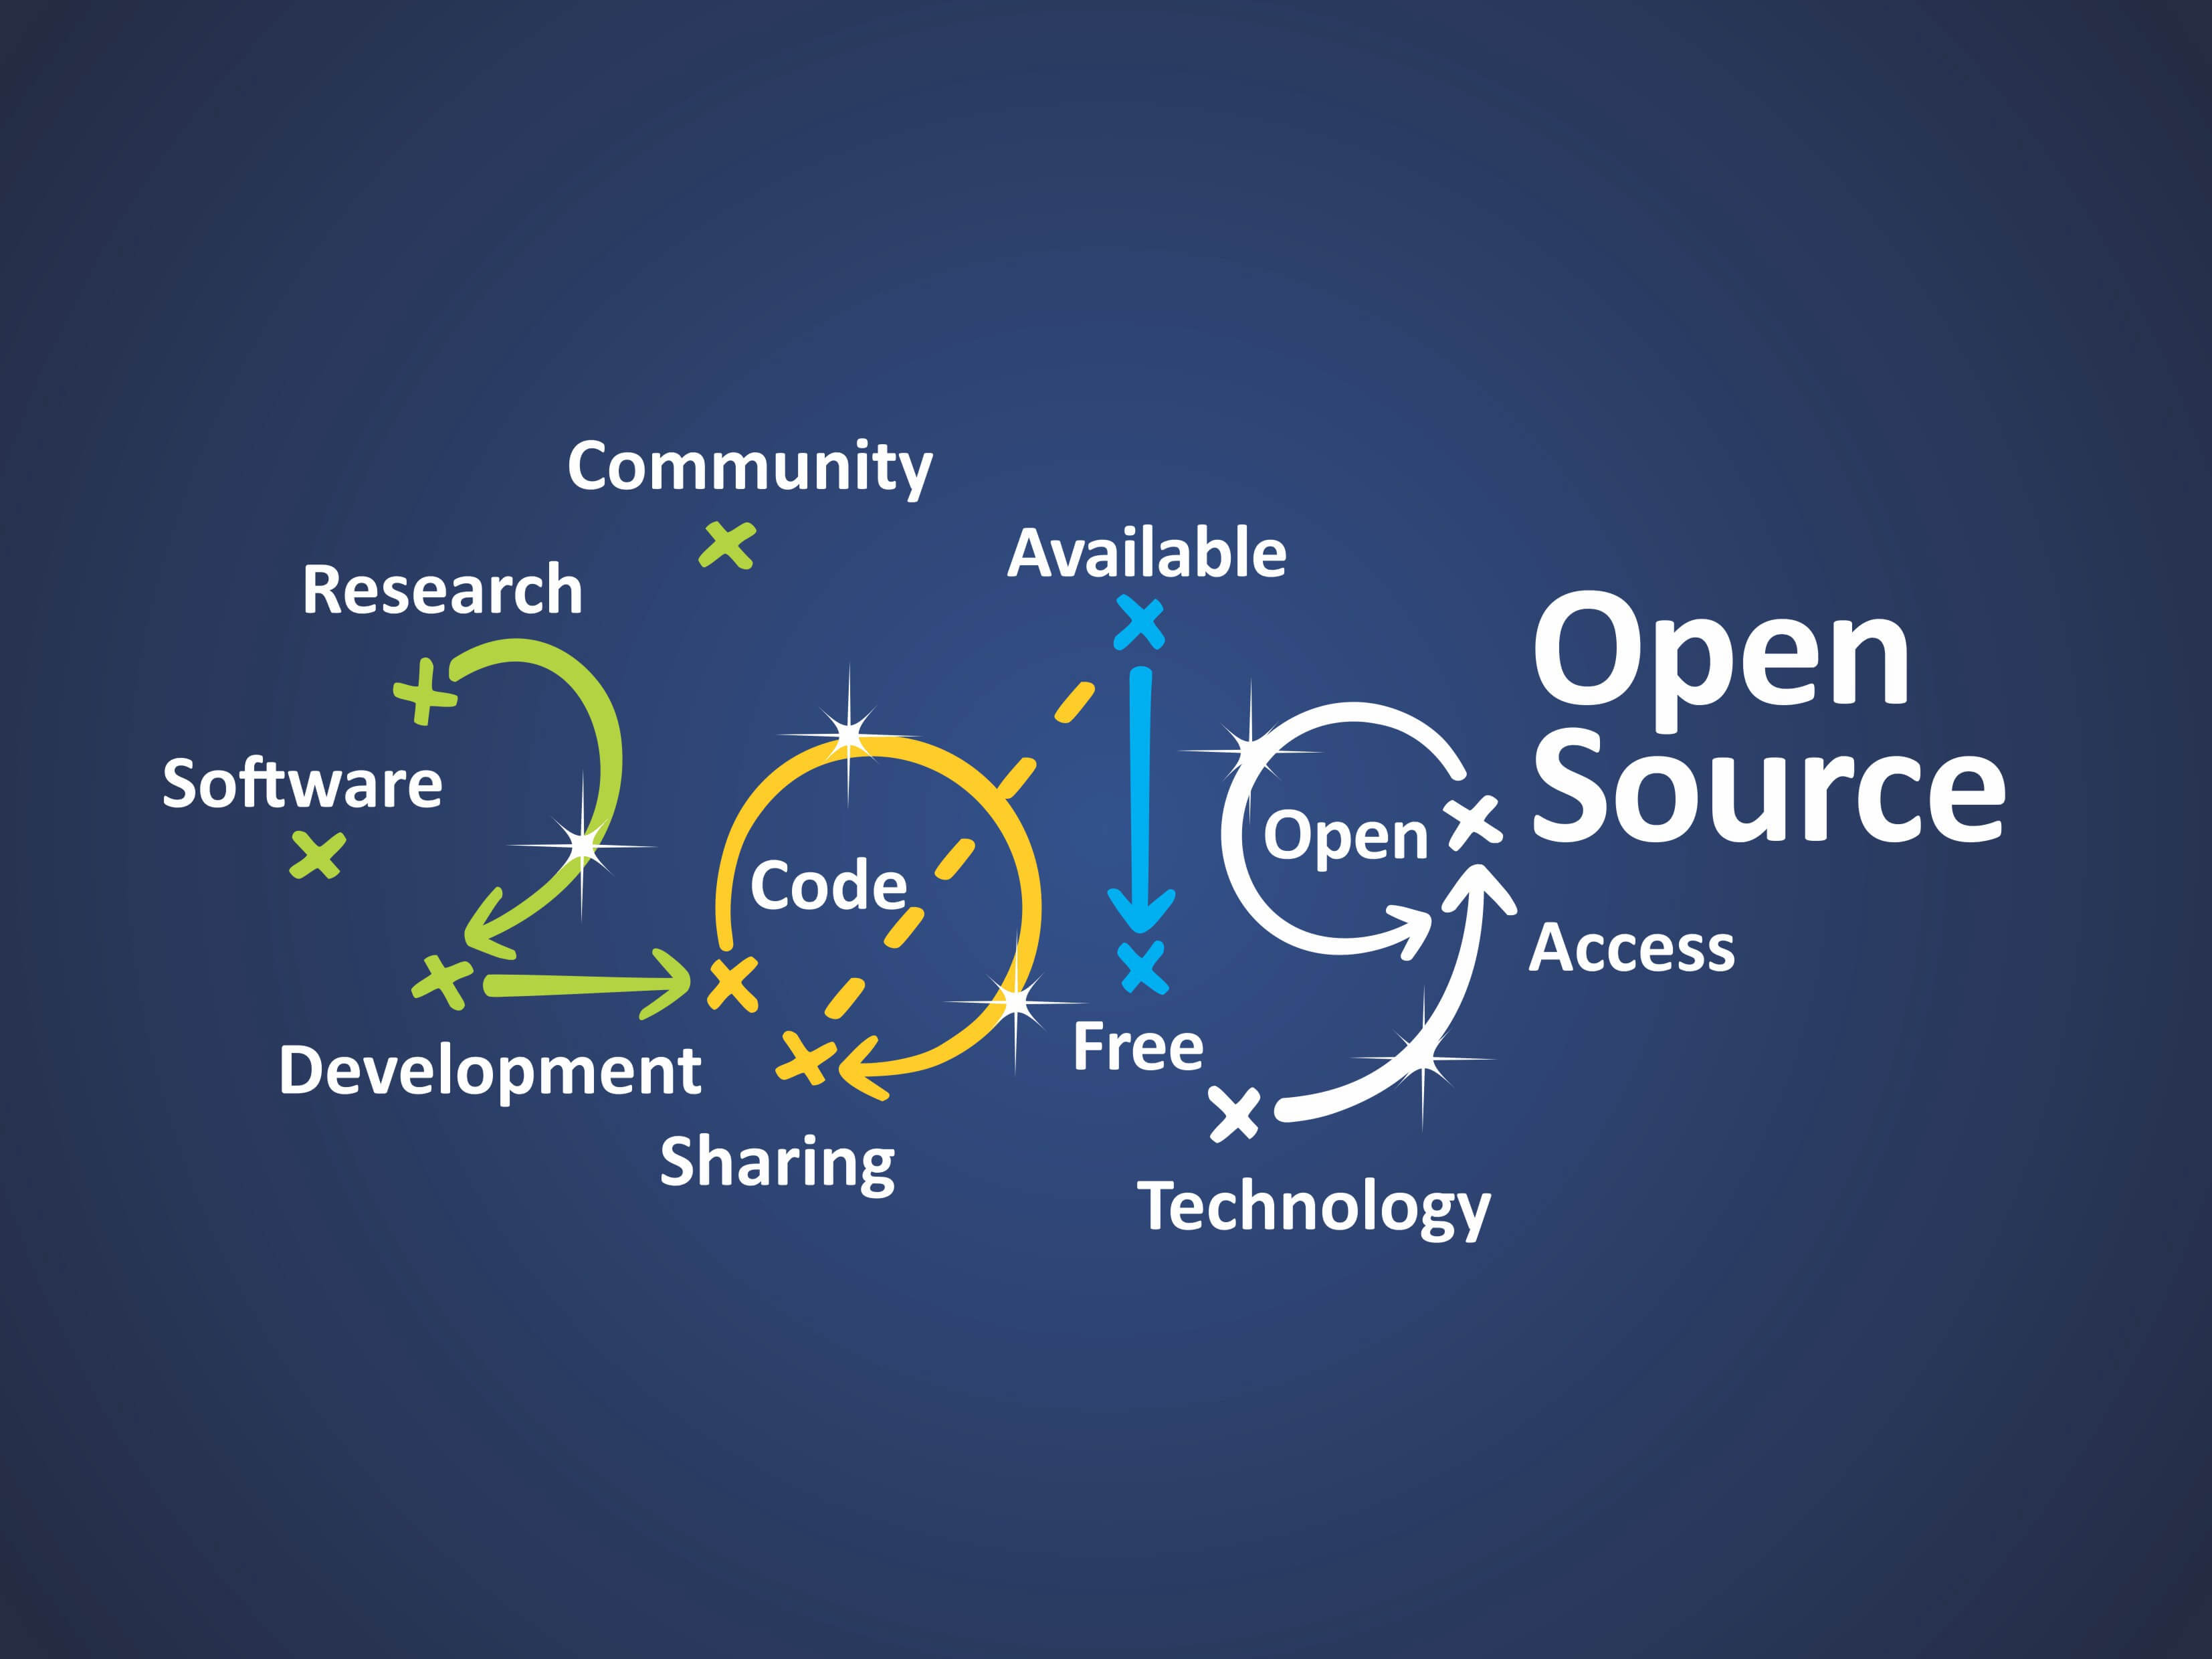 Open Source 2019 Software Research Community Available Open Access Free Sharing Technology Development Code